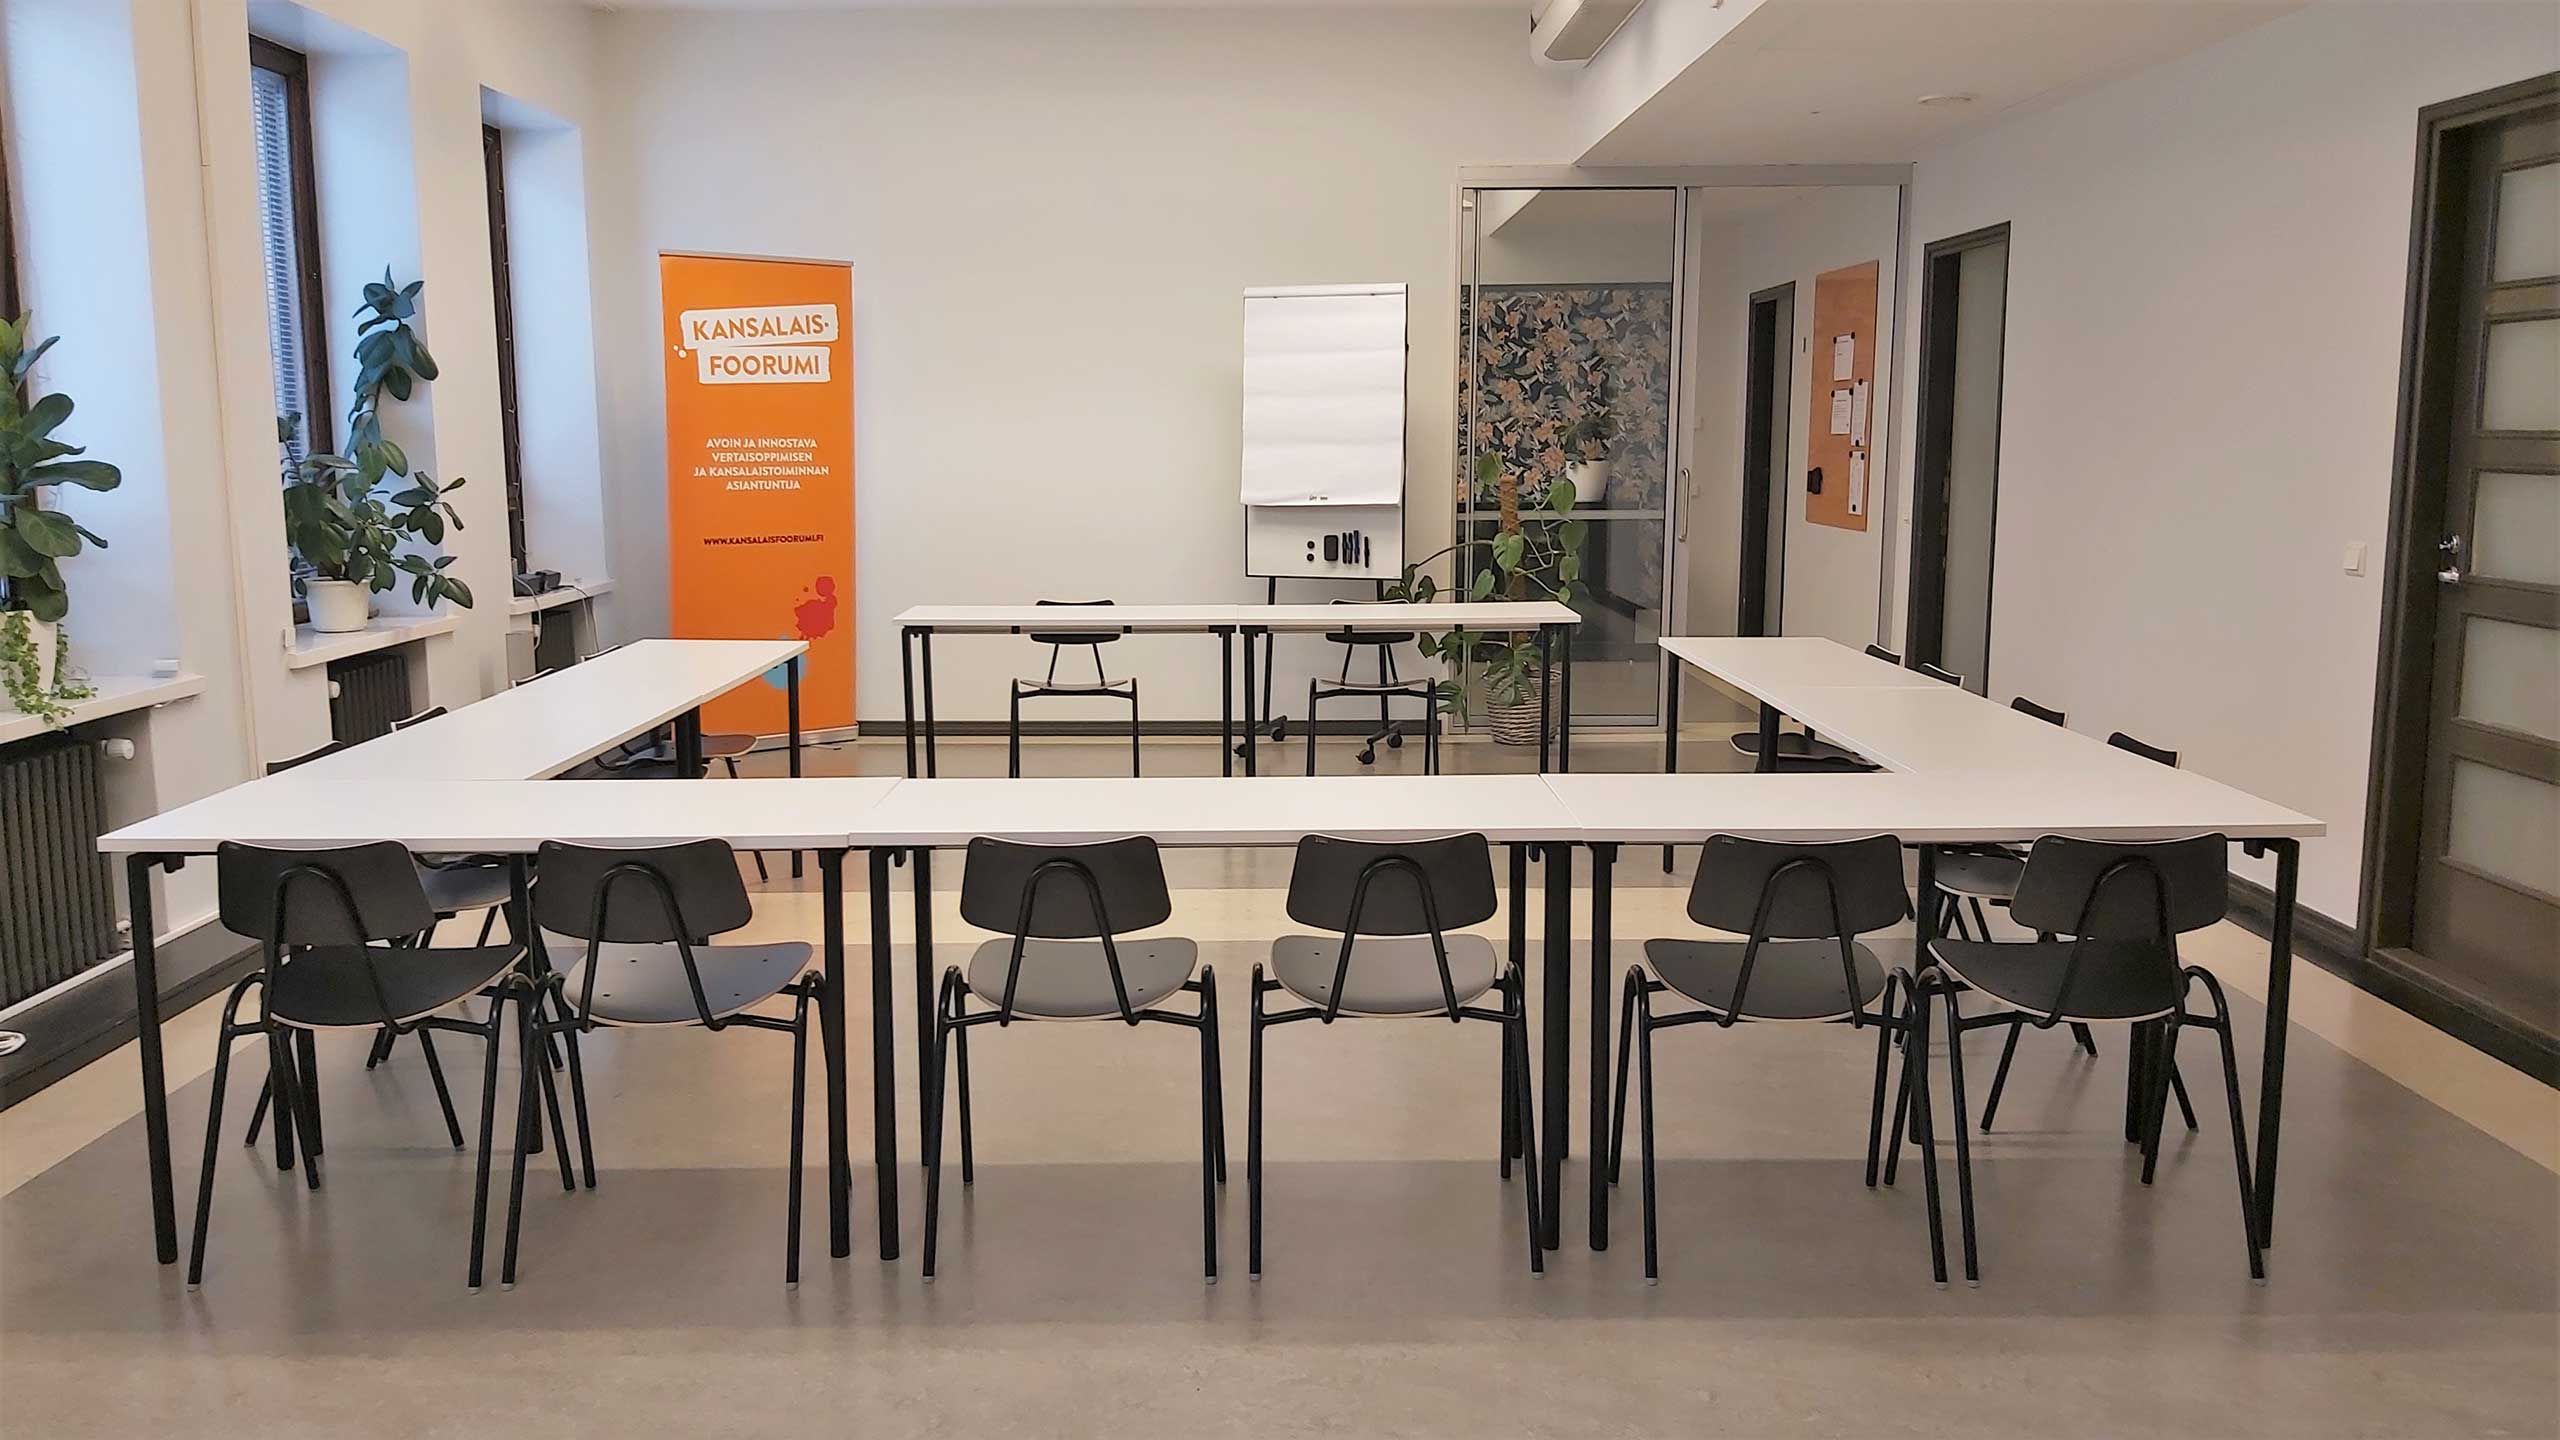 Meeting room furnished with chairs and tables, which are arranged in u-form.